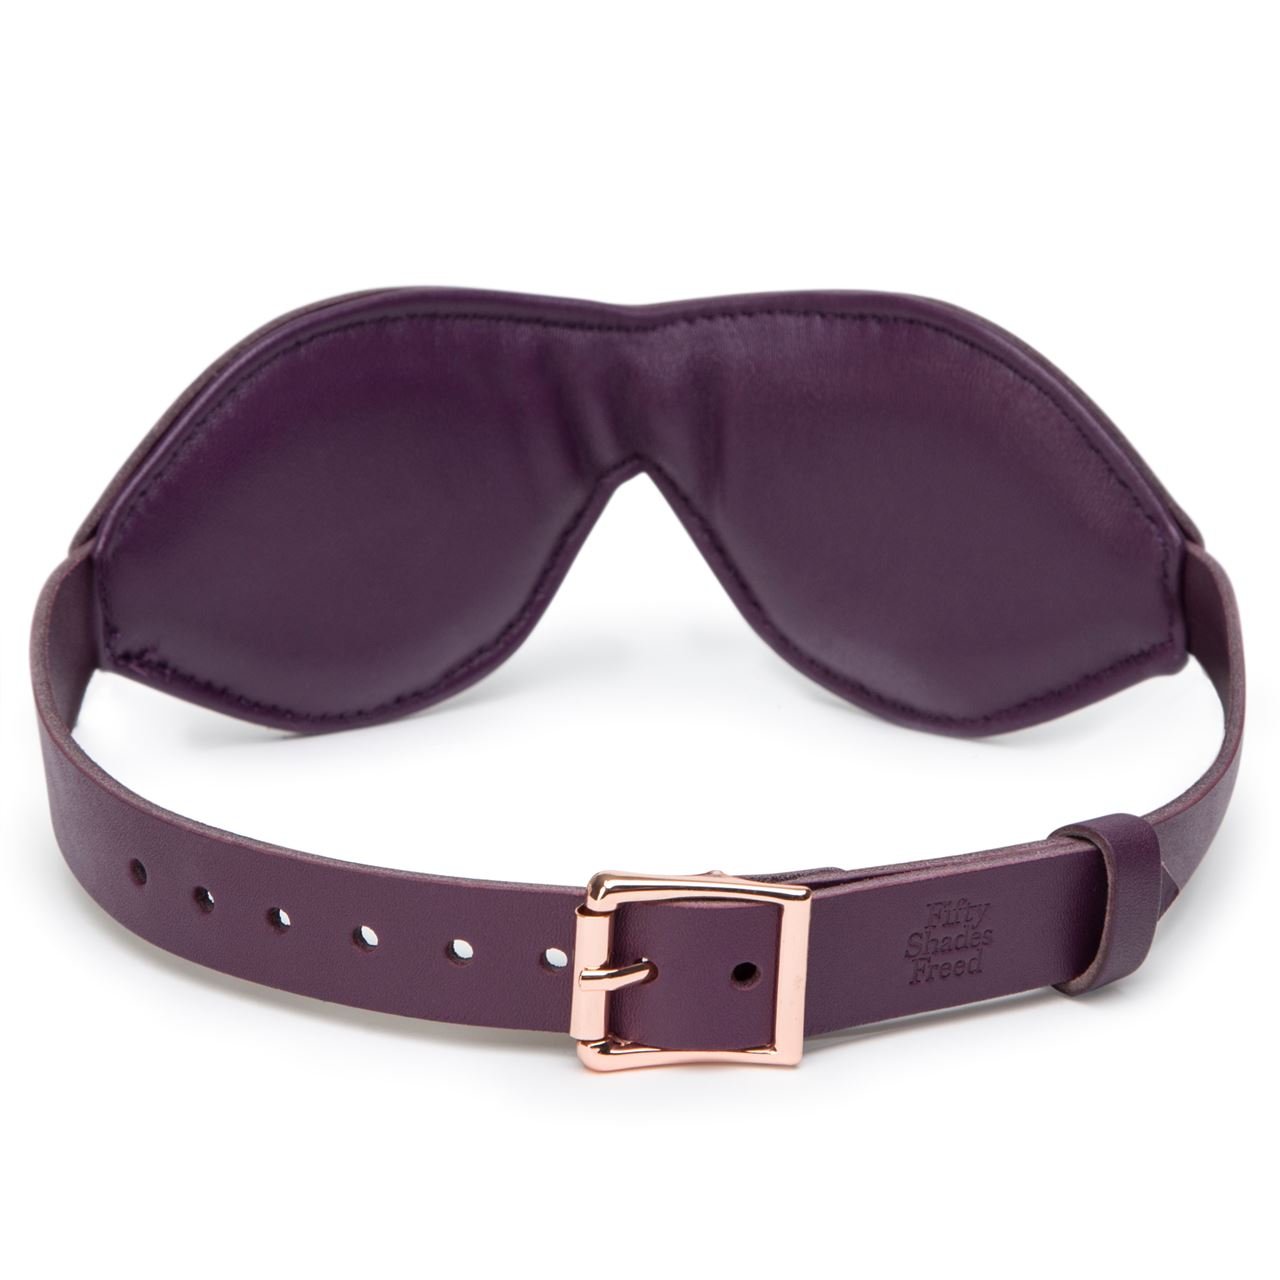 0015255_fifty-shades-freed-cherished-collection-leather-blindfold_yvsfd1m01qcd6o51.jpeg